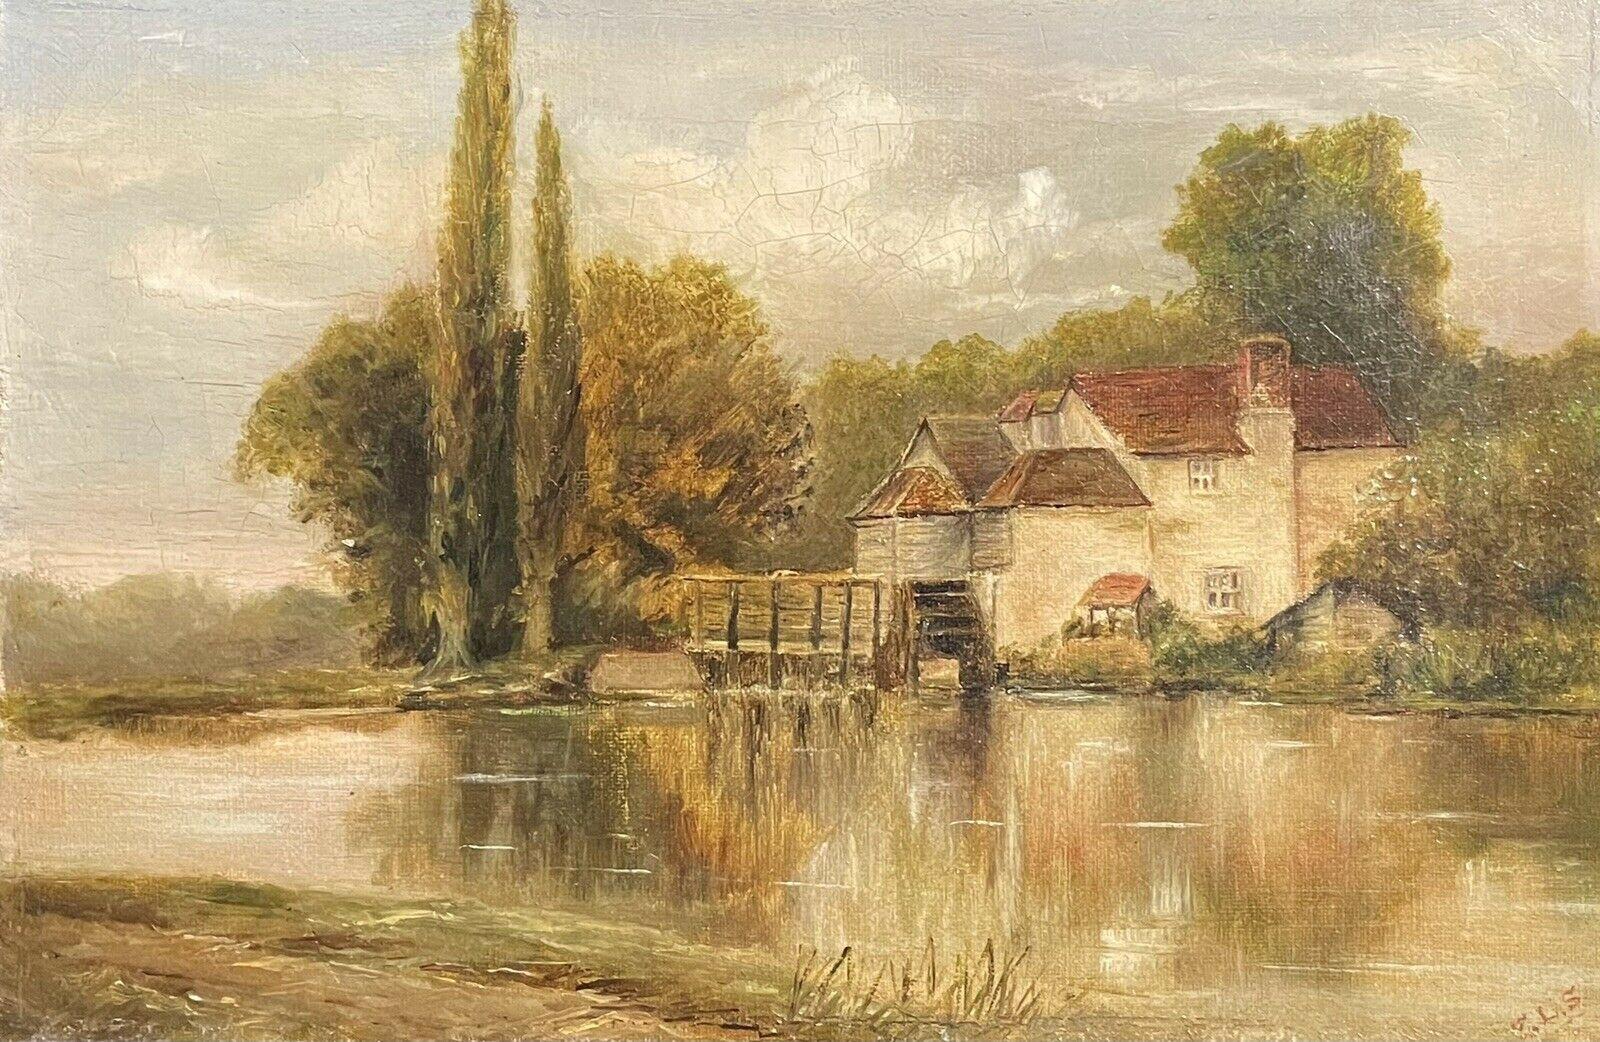 French Antique Victorian Landscape Oil Painting DIGITAL PRINT Wall Art Vintage French Country Cottage Landscape